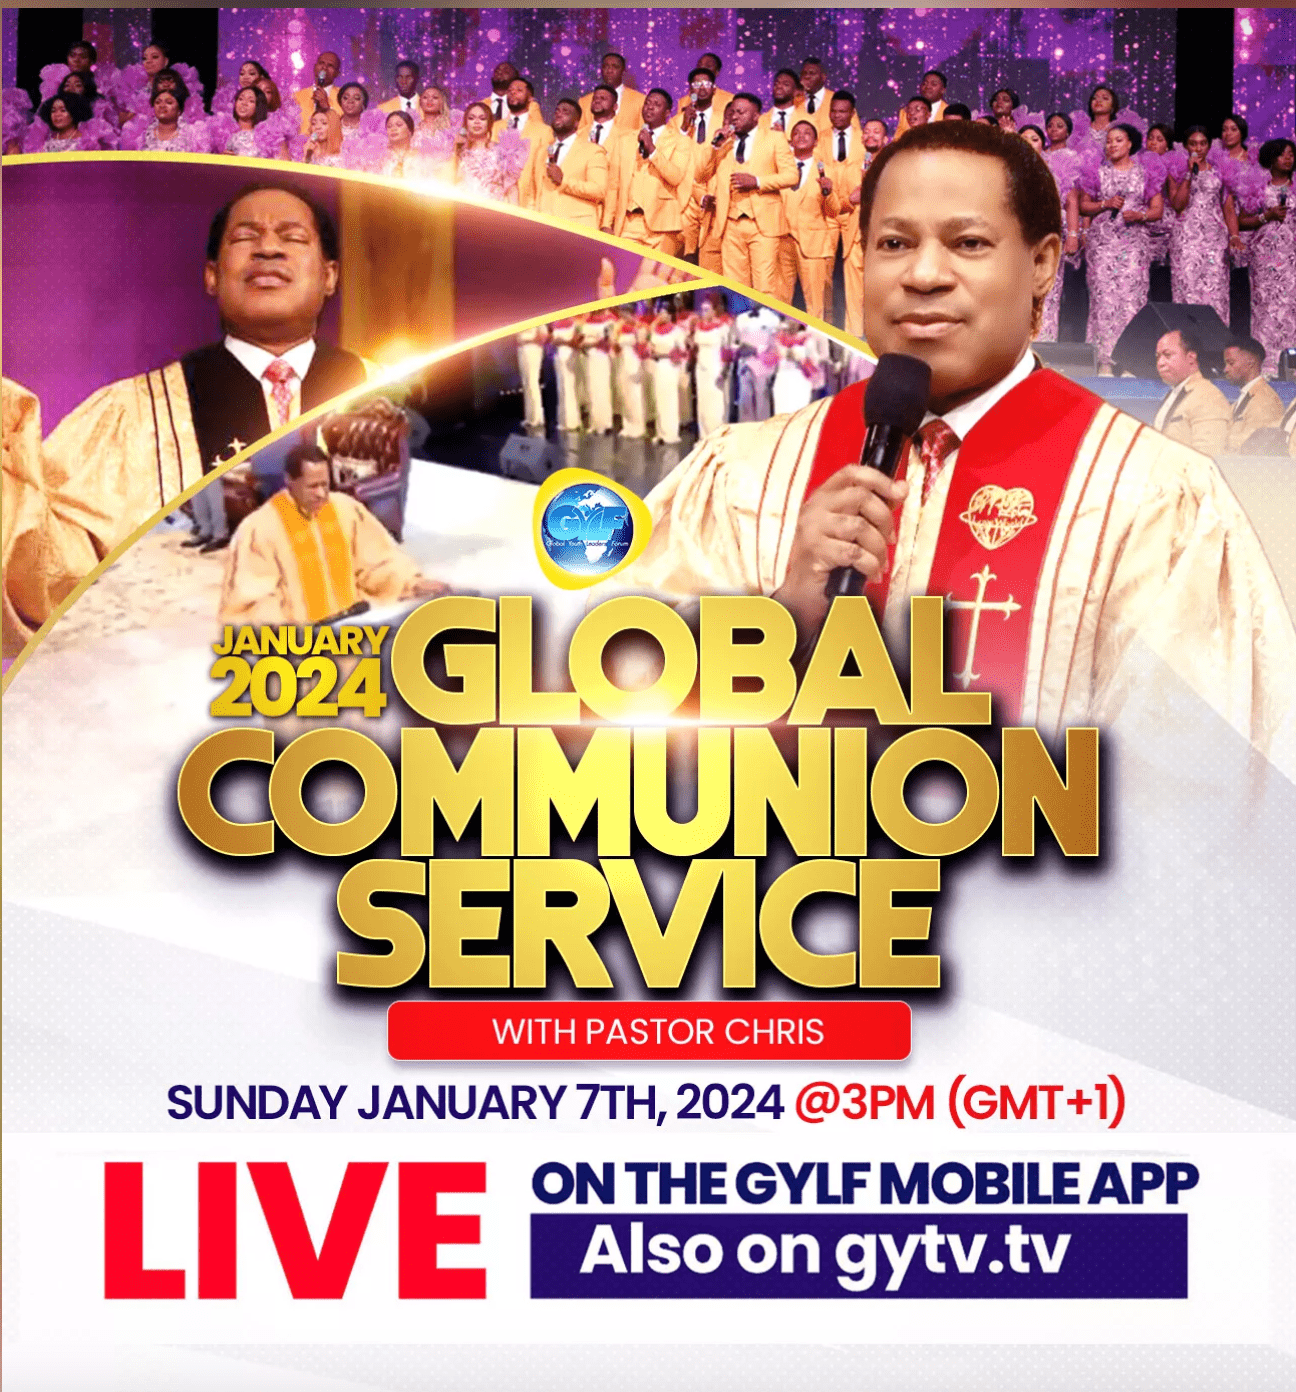 January 2024 Global Communion Service with Pastor Chris